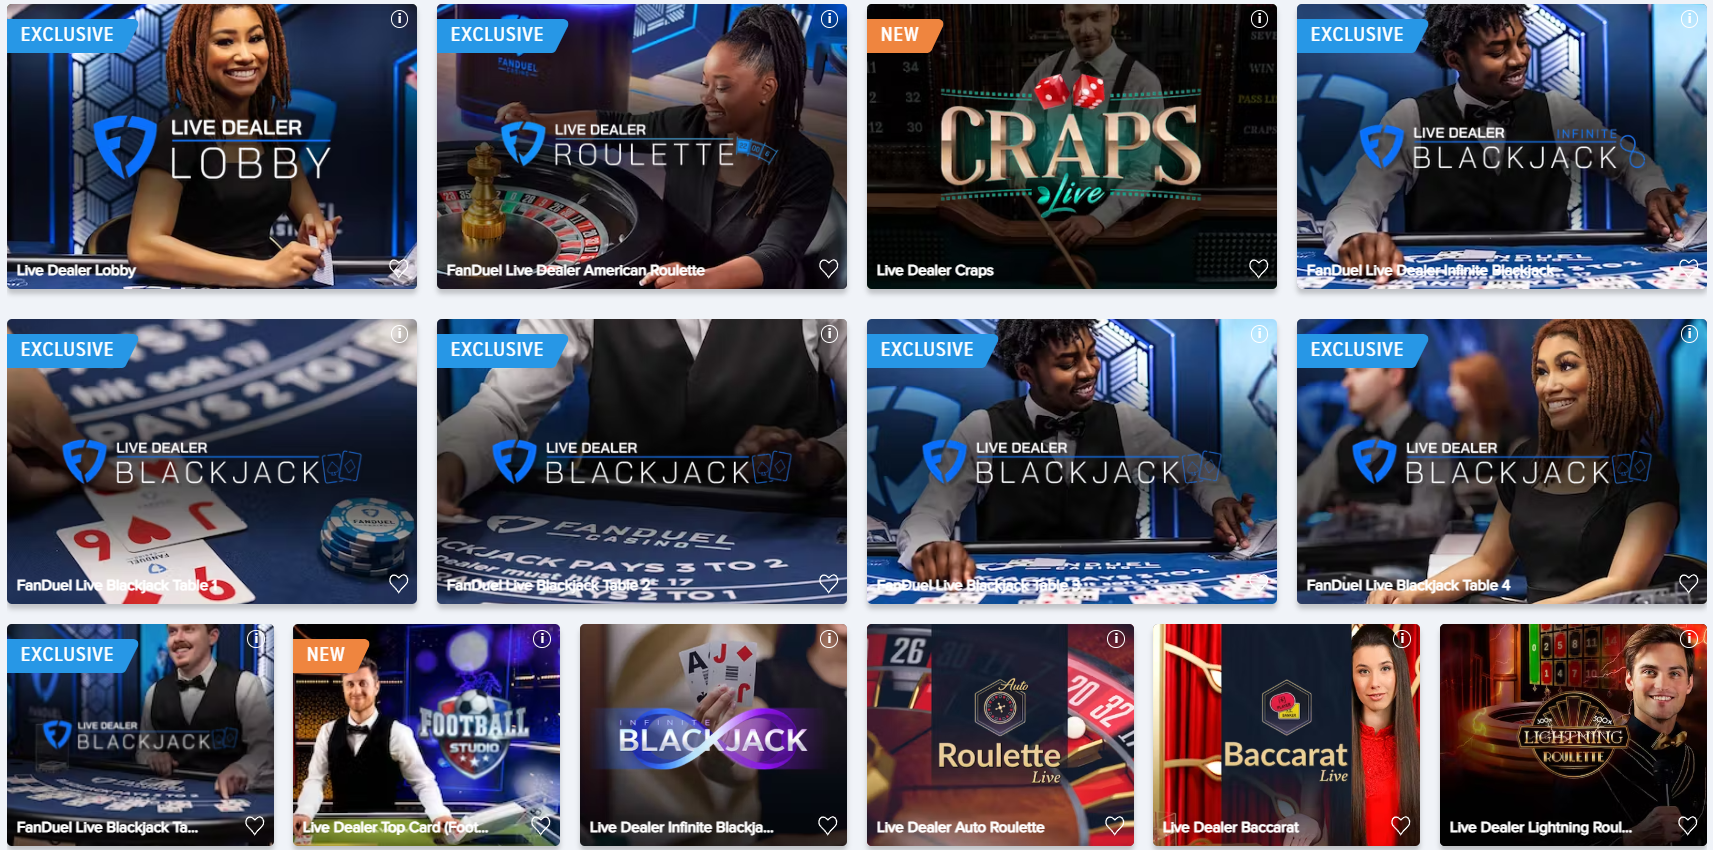 Transport to the Casino Floor With Live Dealer Games Available 24-7